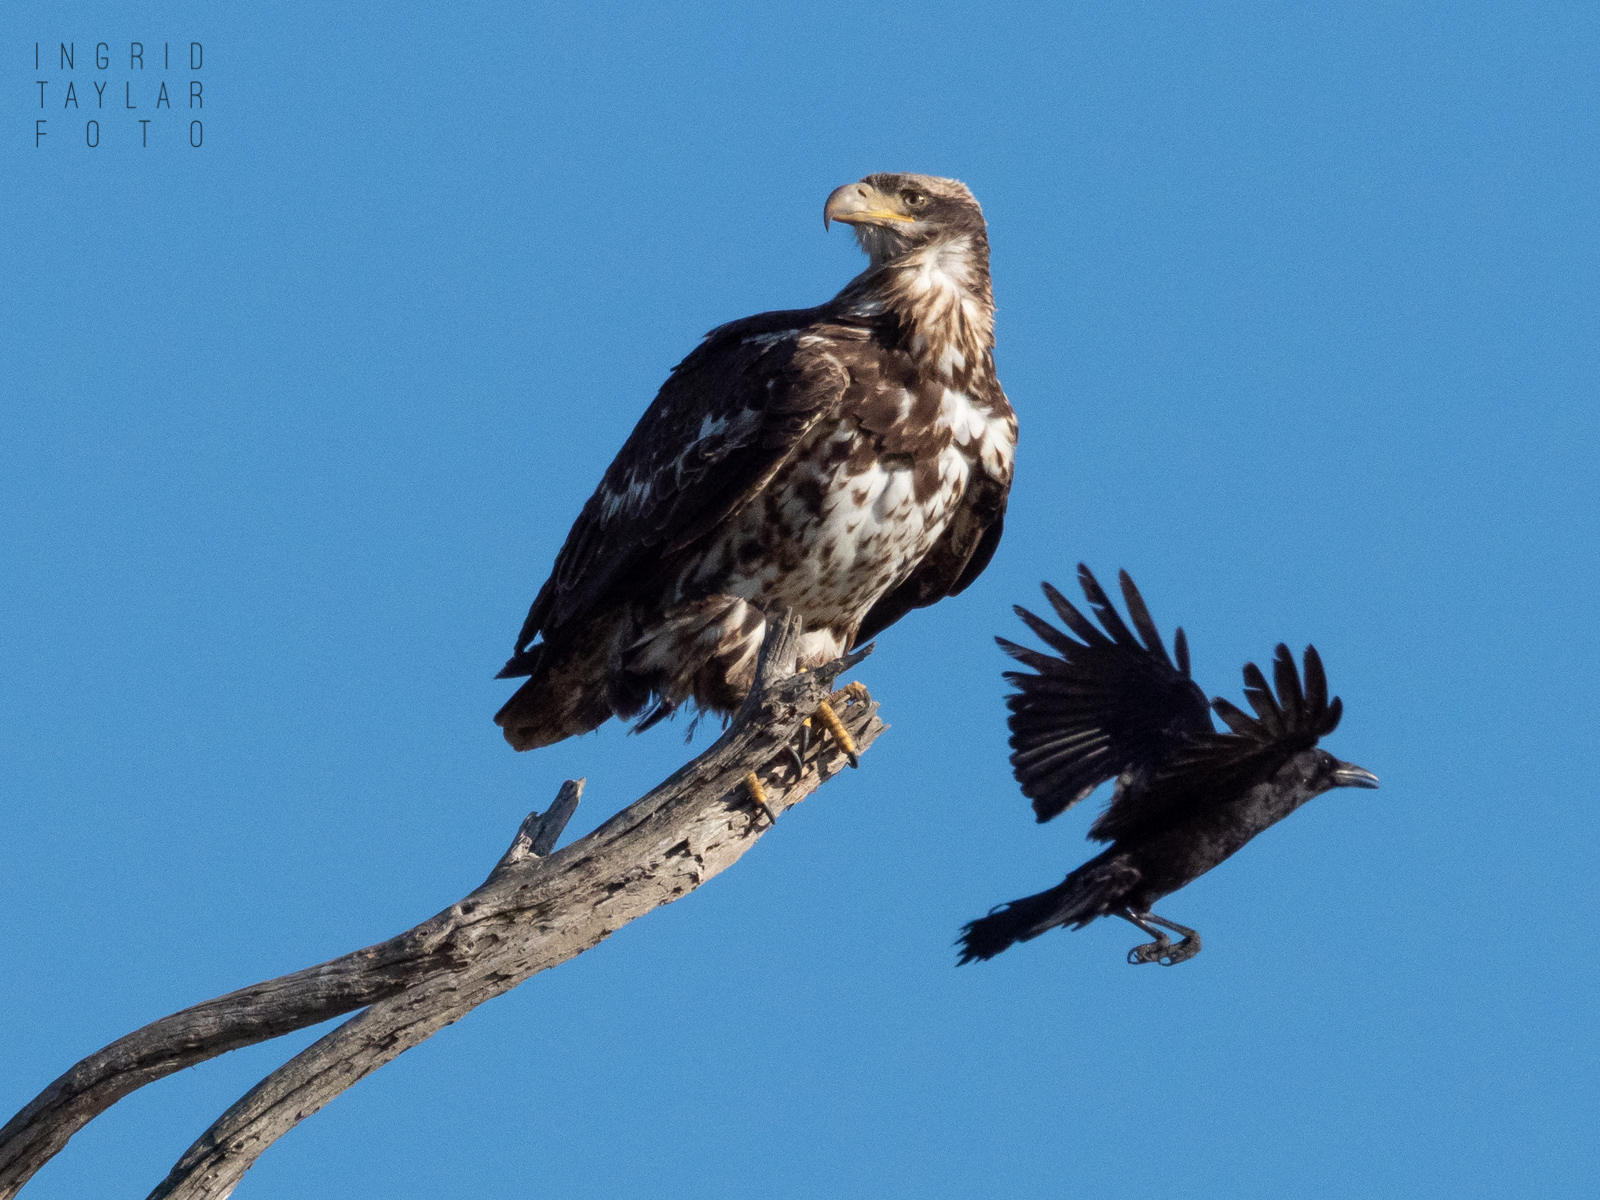 Immature Bald Eagle Mobbed by Crows